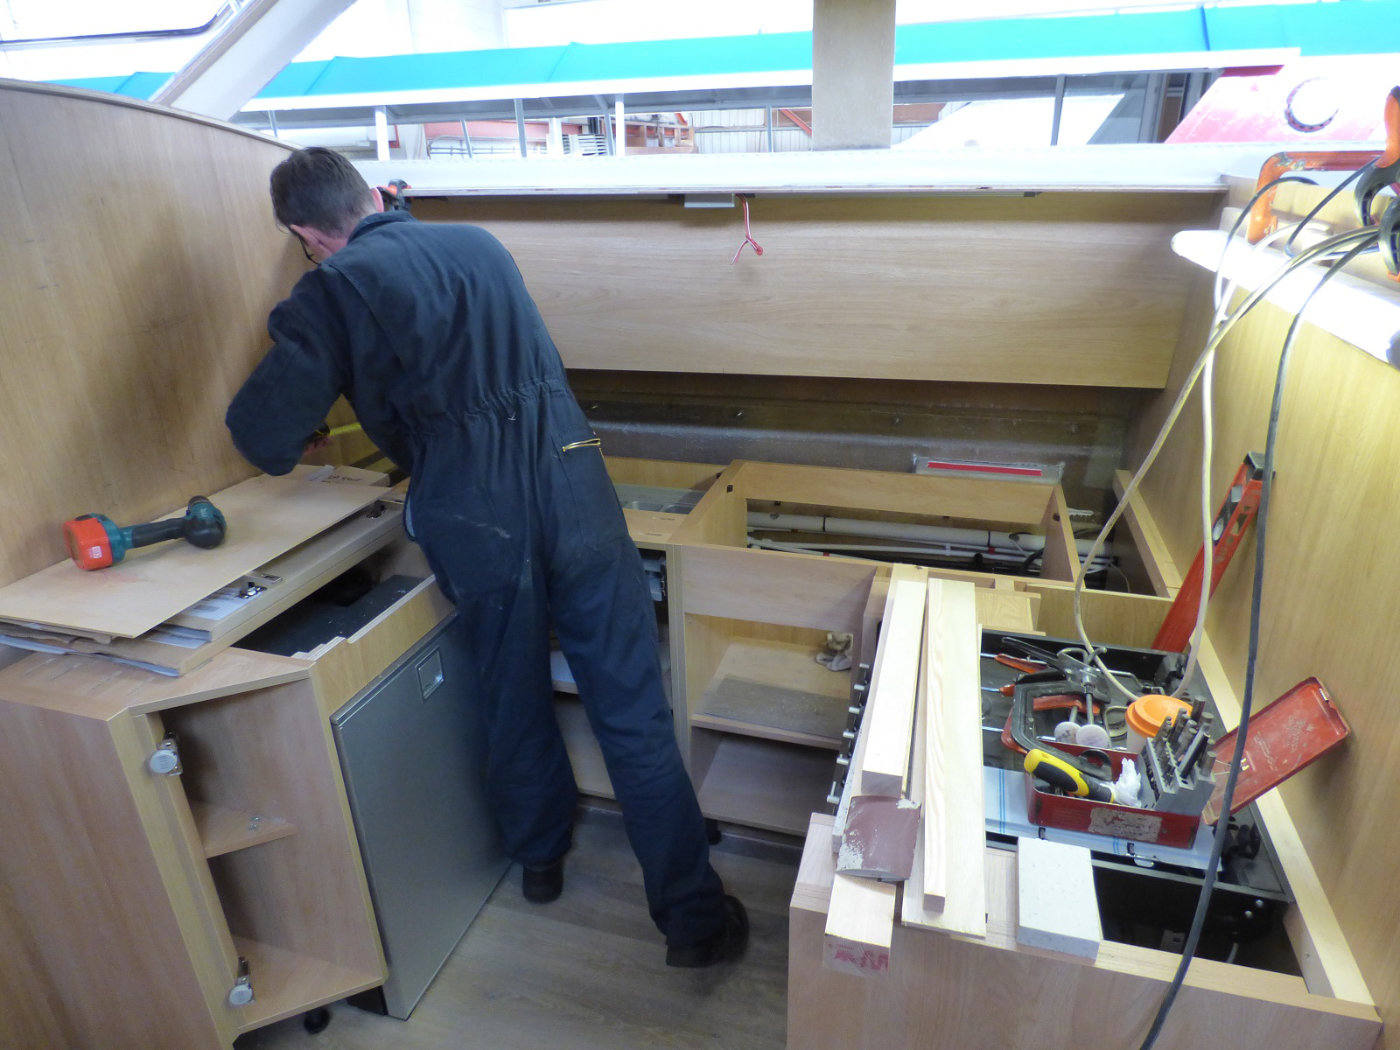 Entreprenuer galley being fitted